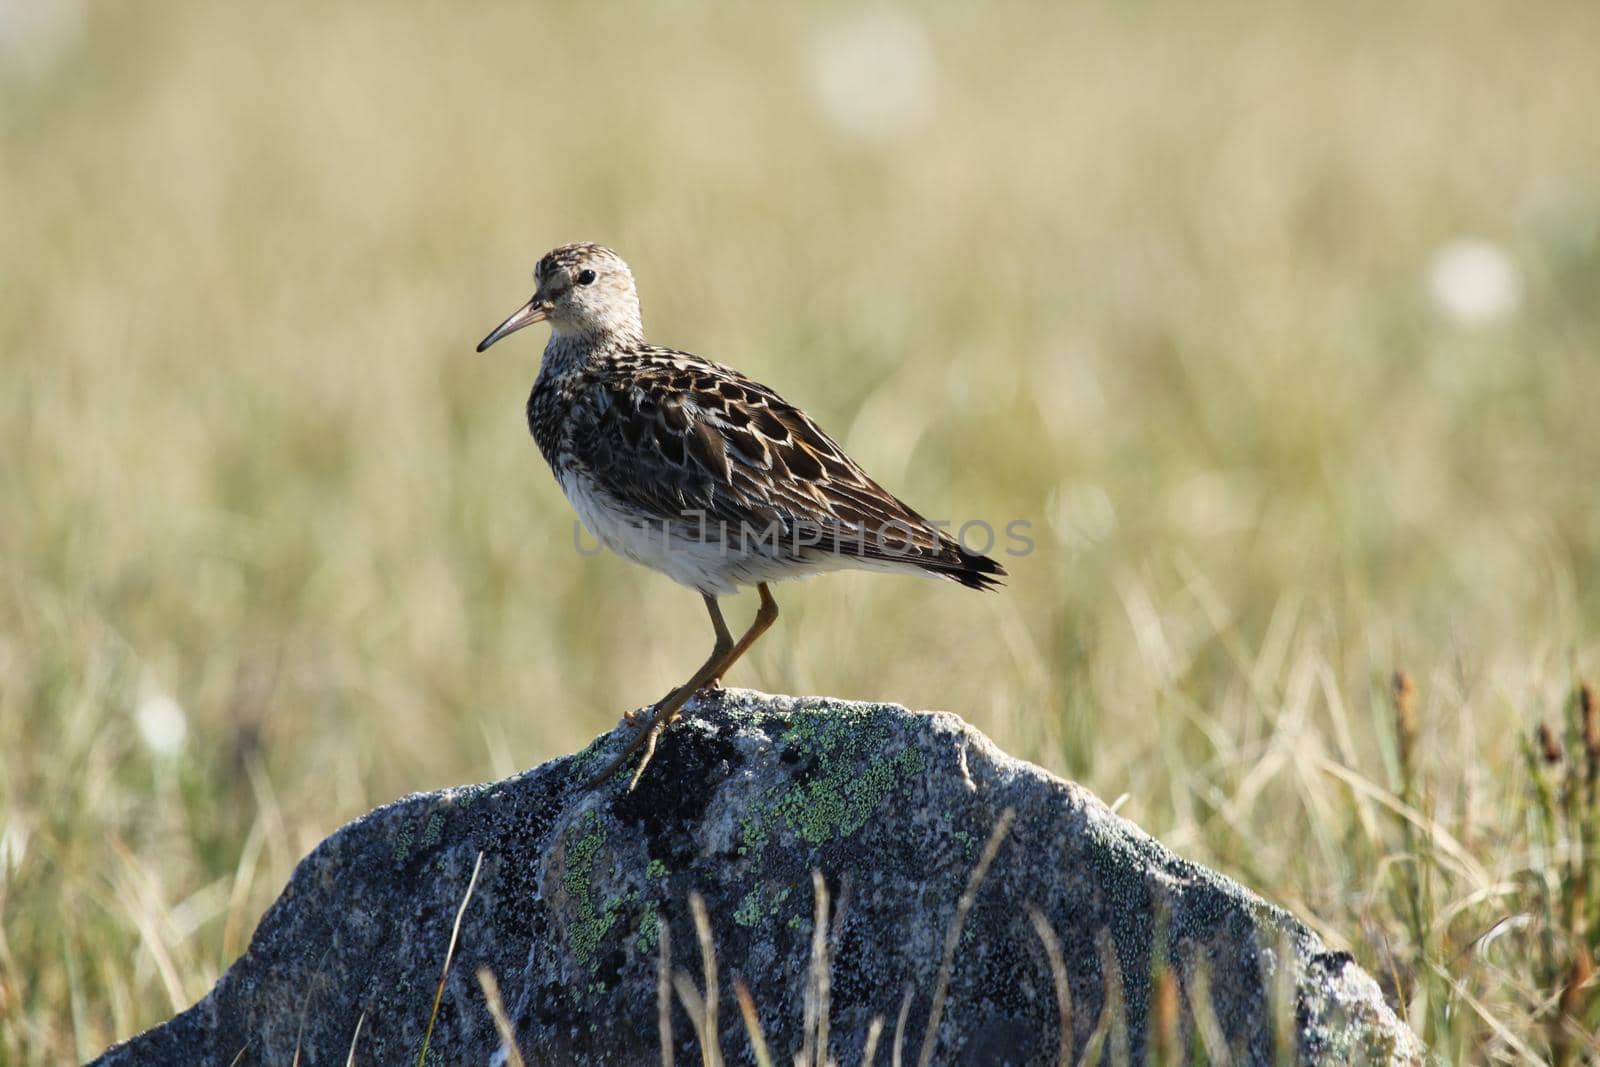 Pectoral sandpiper standing on a rock with tundra grass in the background by Granchinho